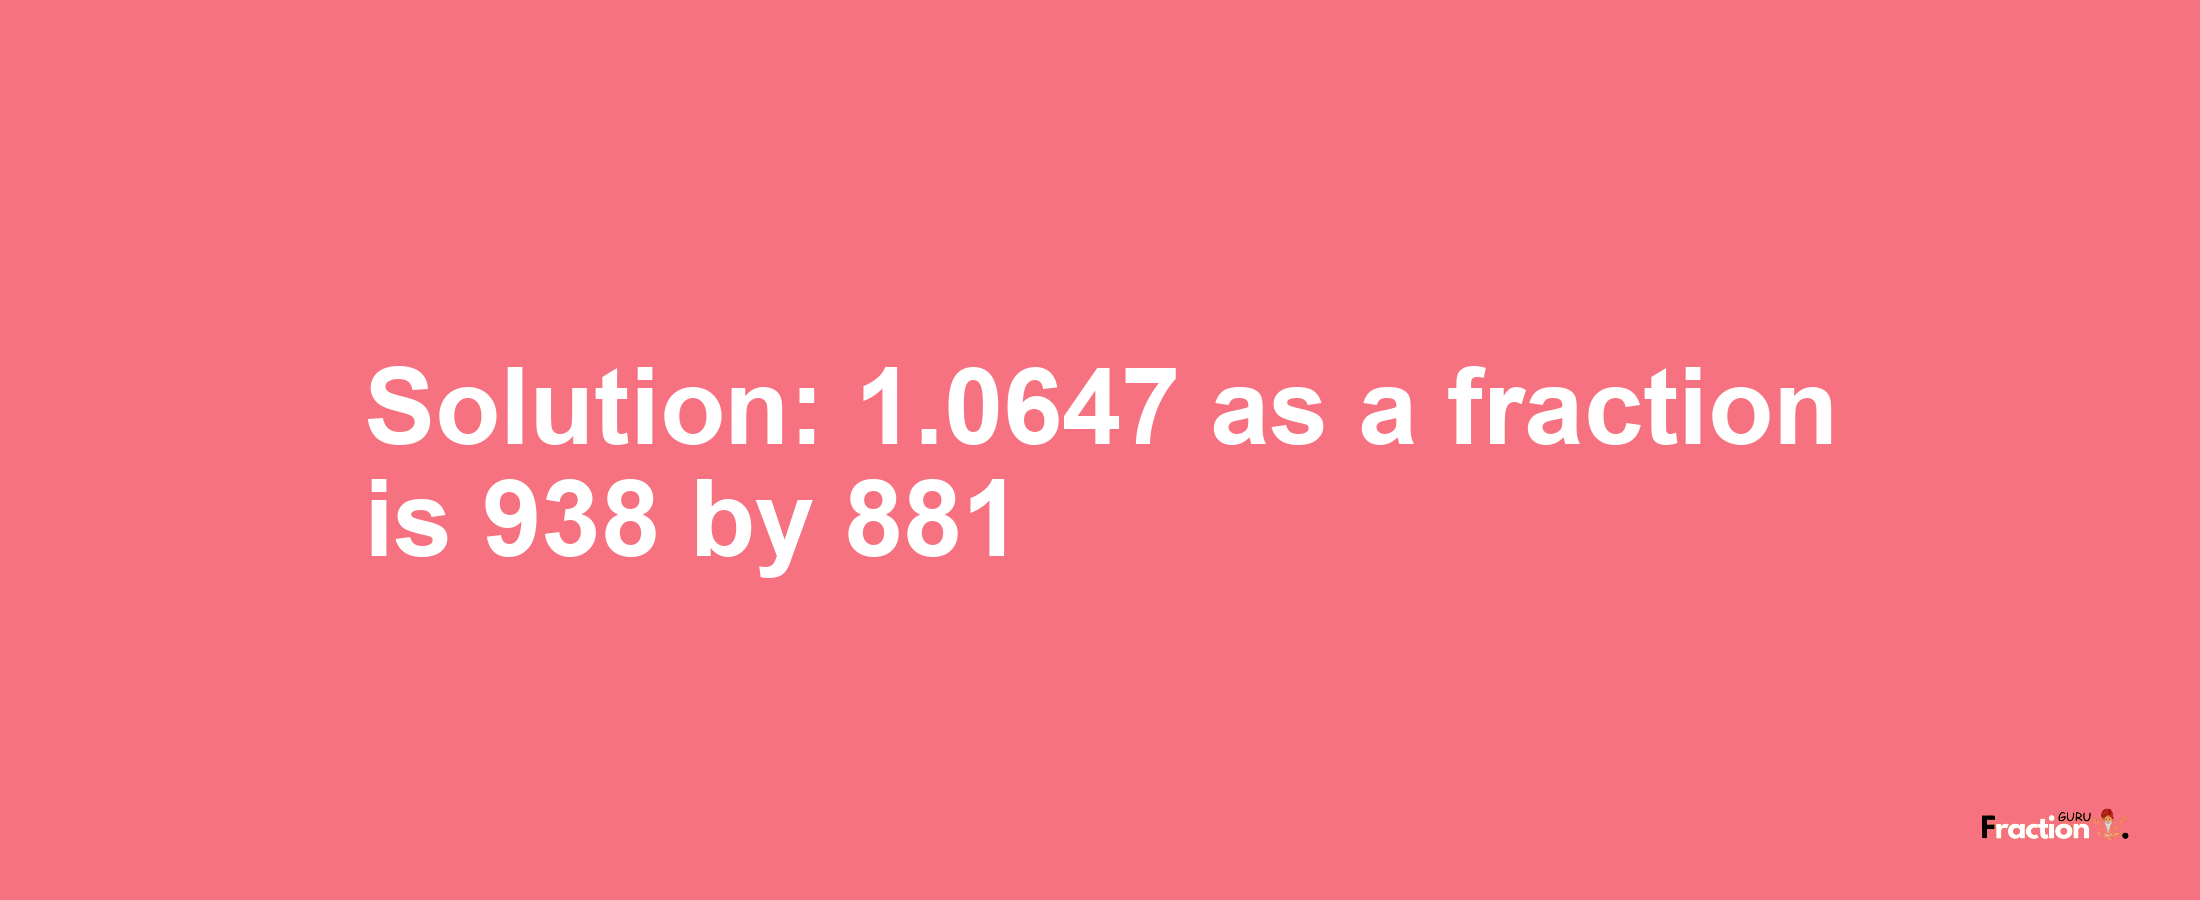 Solution:1.0647 as a fraction is 938/881